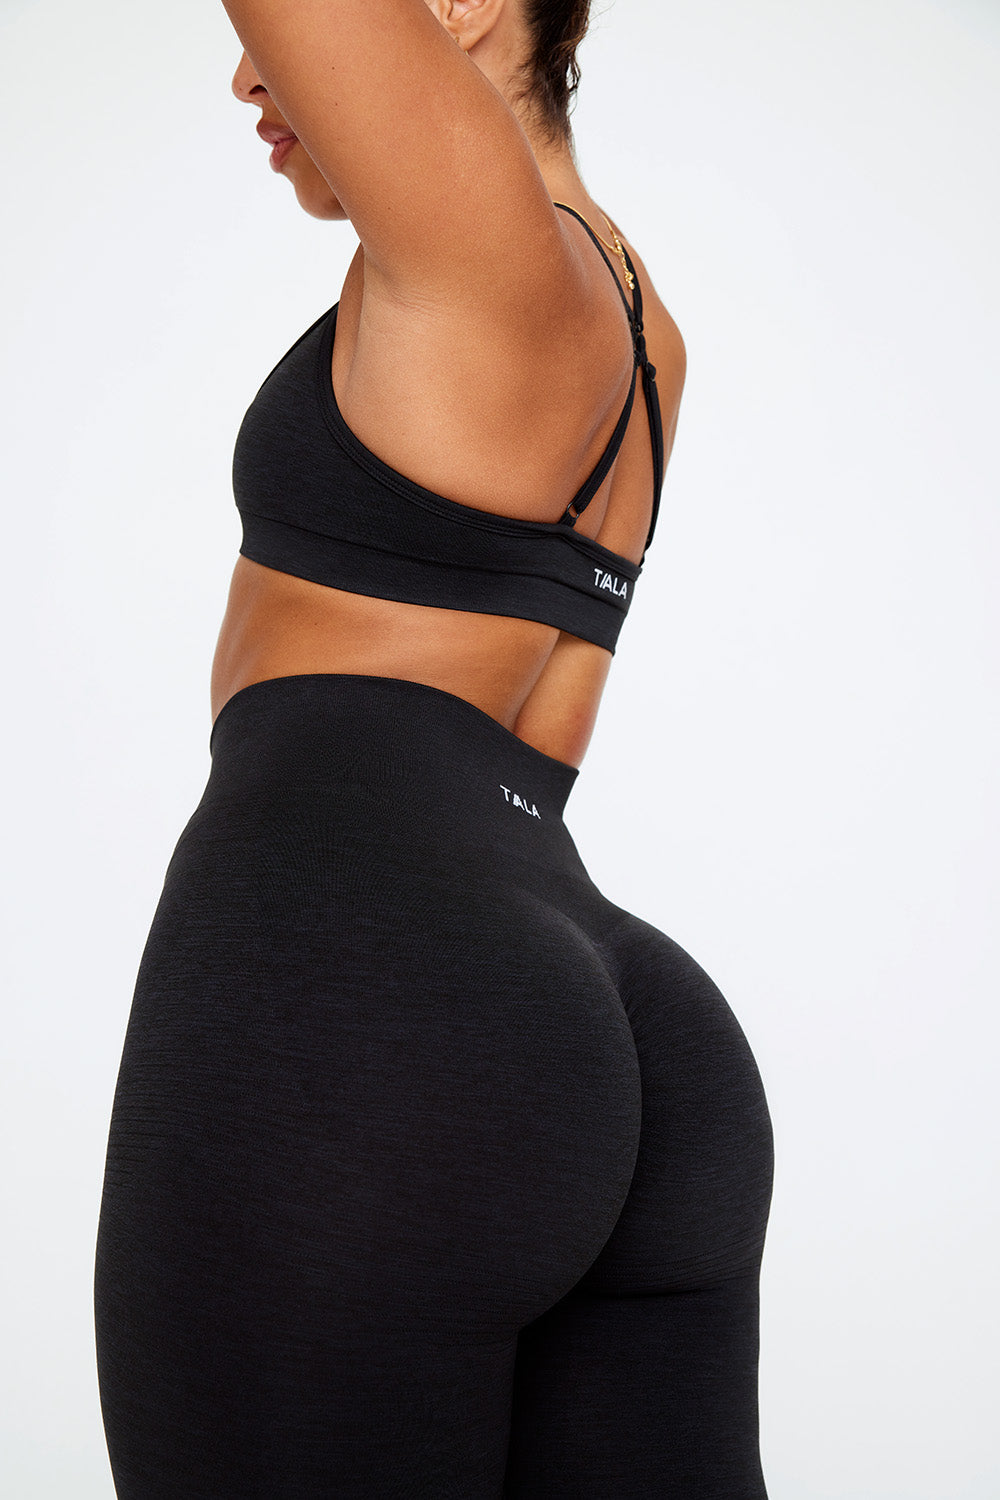 Signature Scrunch Ankle Length Leggings - Midnight - Muscle Nation